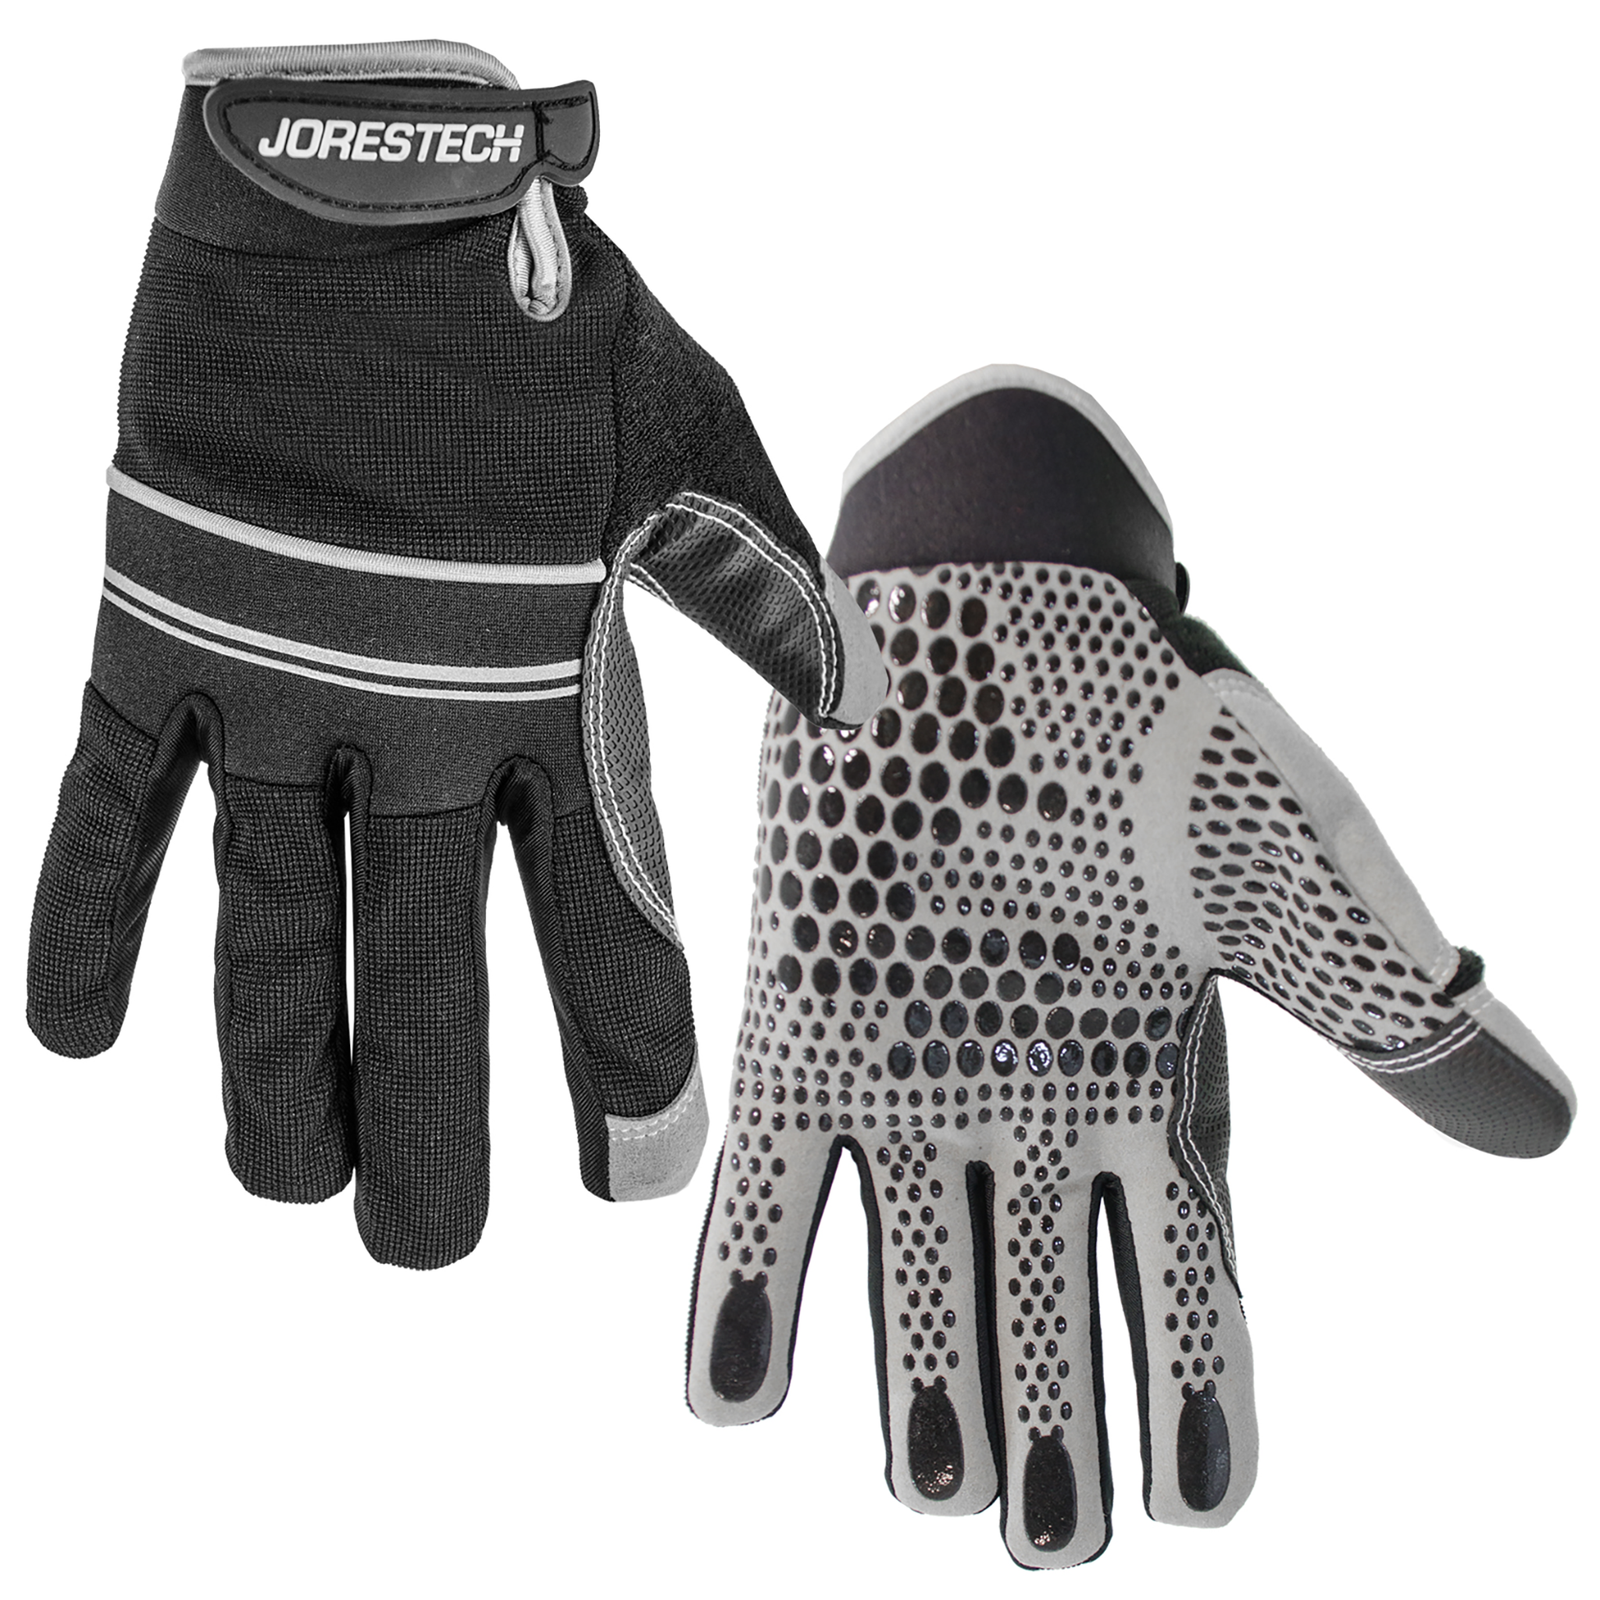 A pair of black JORESTECH safety work gloves with anti slip silicone black dotted palms